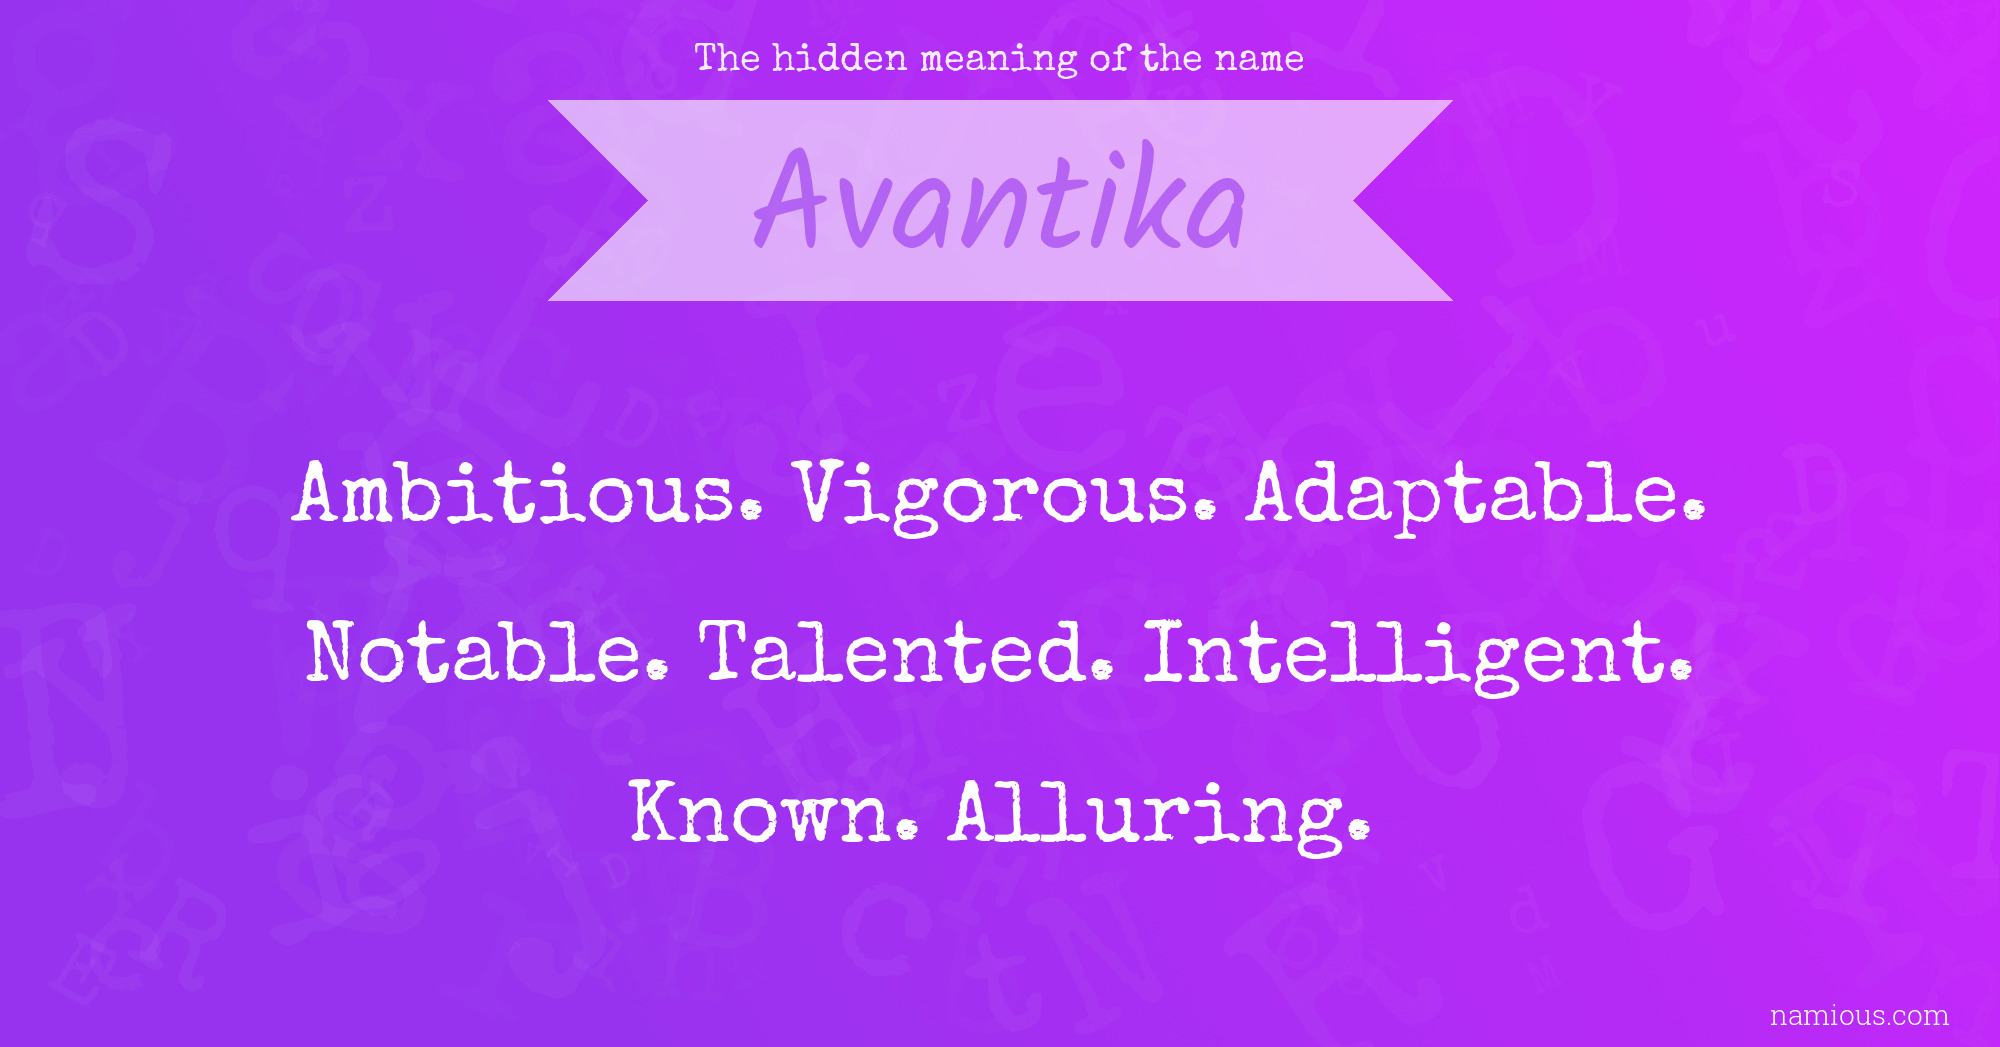 The hidden meaning of the name Avantika